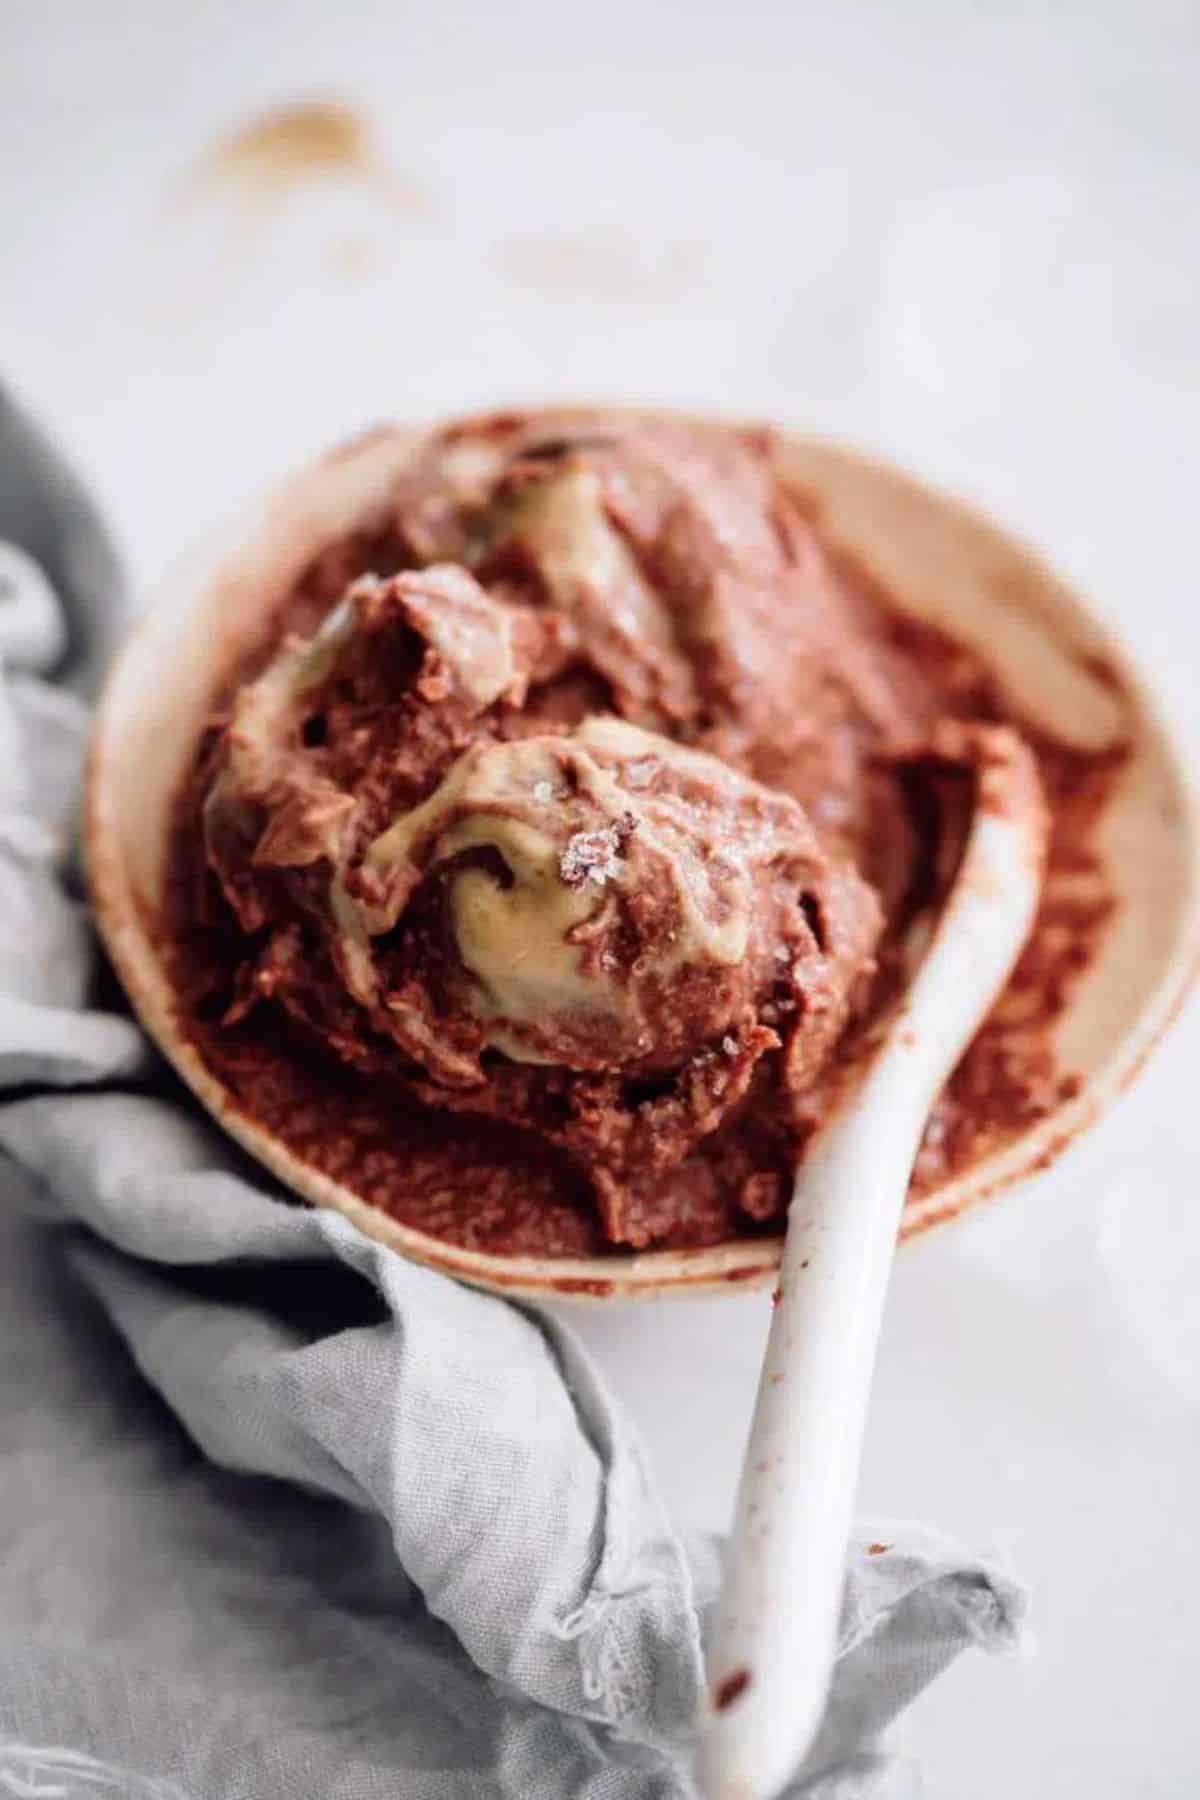 A bowl of Chocolate Ice Cream with a spoon.